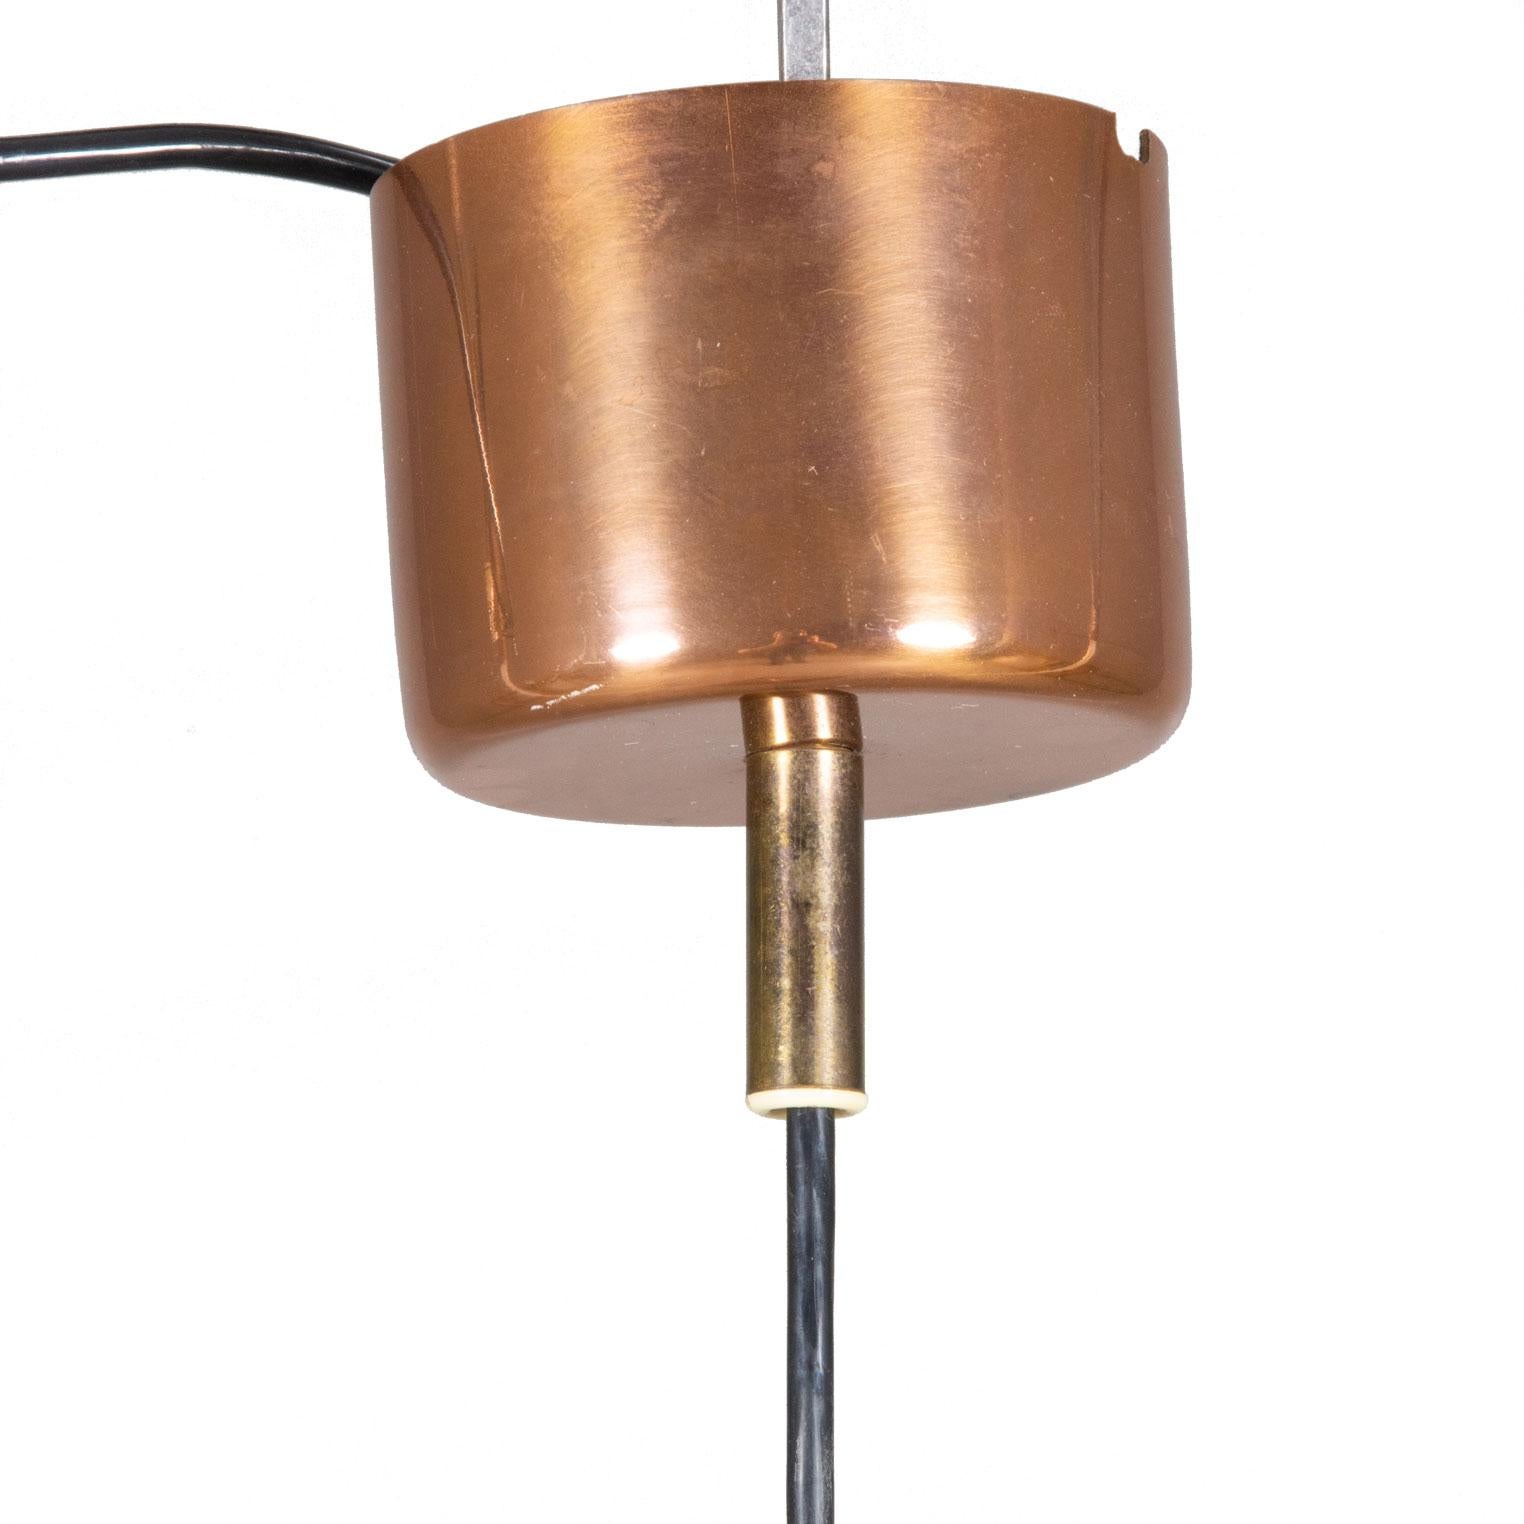 Mid-20th Century Scandinavian Modern Copper Pendant by Hans Agne Jakobsson with Glass Decor 